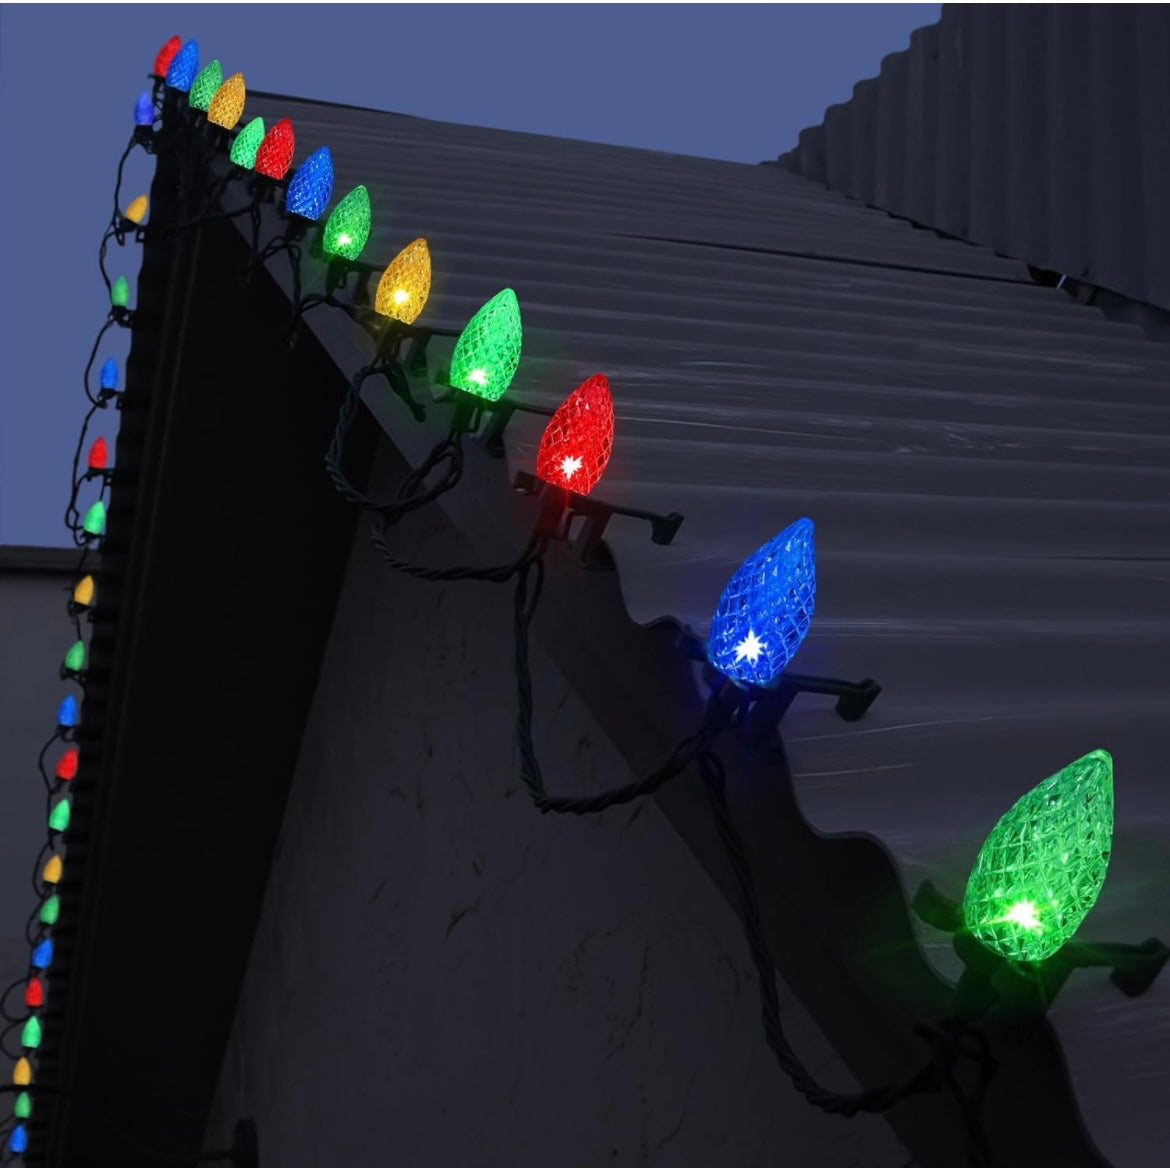 Anycosy Christmas Lights Outdoor, 100 LED C9 String Lights with Timer Function Plug in 8 Modes for Christmas Decorations